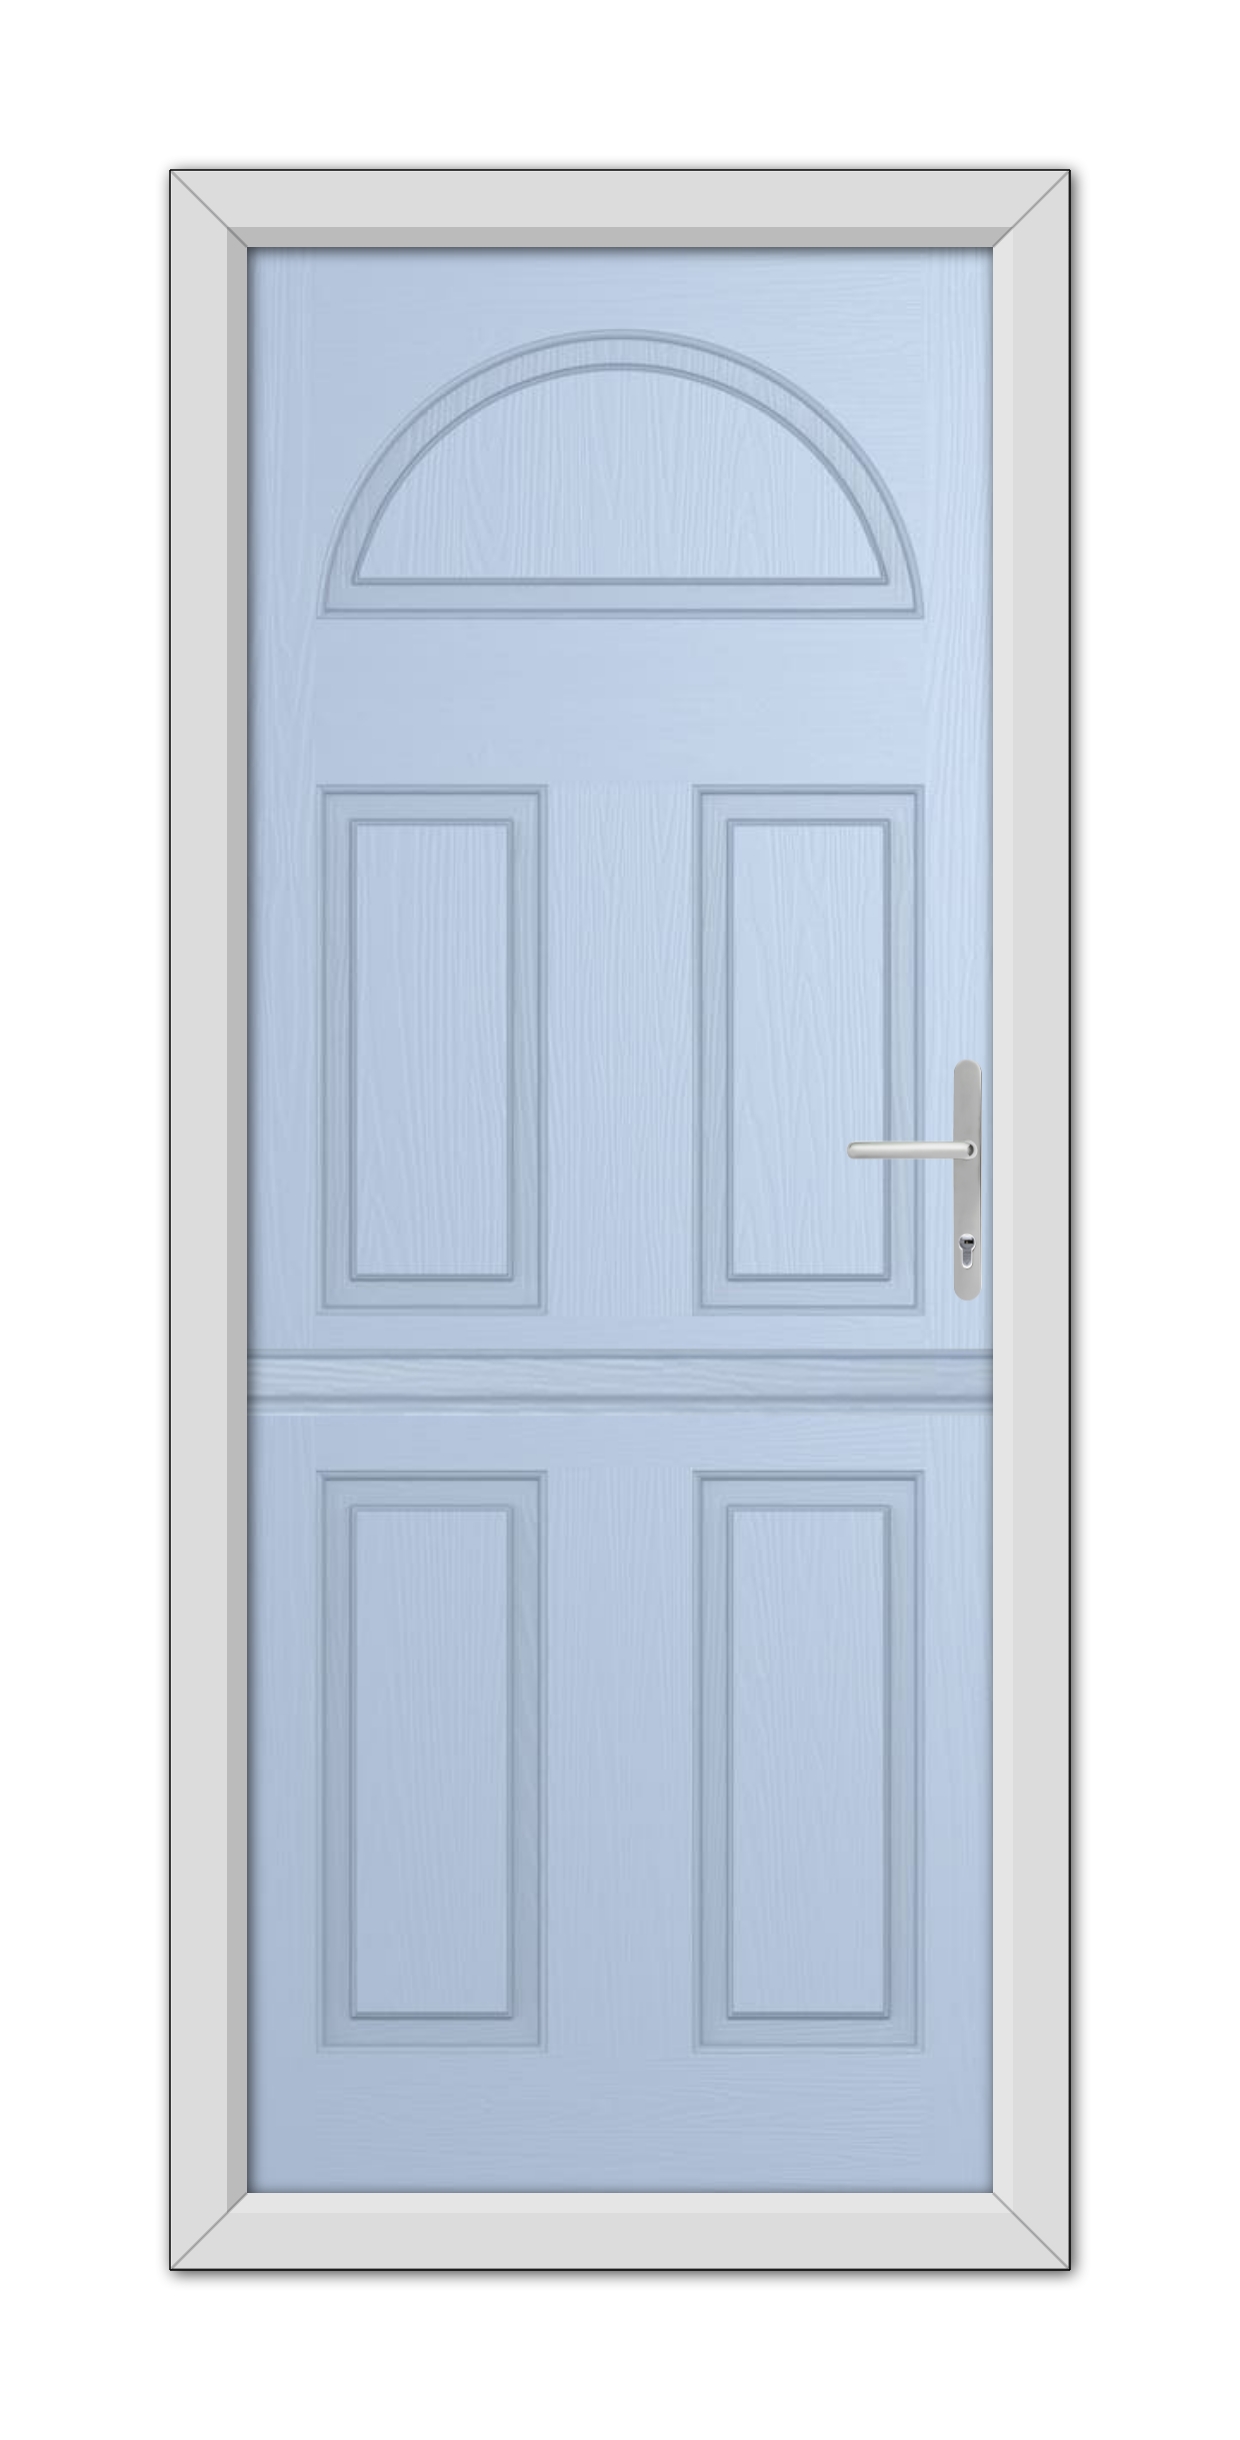 A Duck Egg Blue Winslow Solid Stable Composite Door with six panels and an arched window at the top, featuring a modern handle and framed in white.